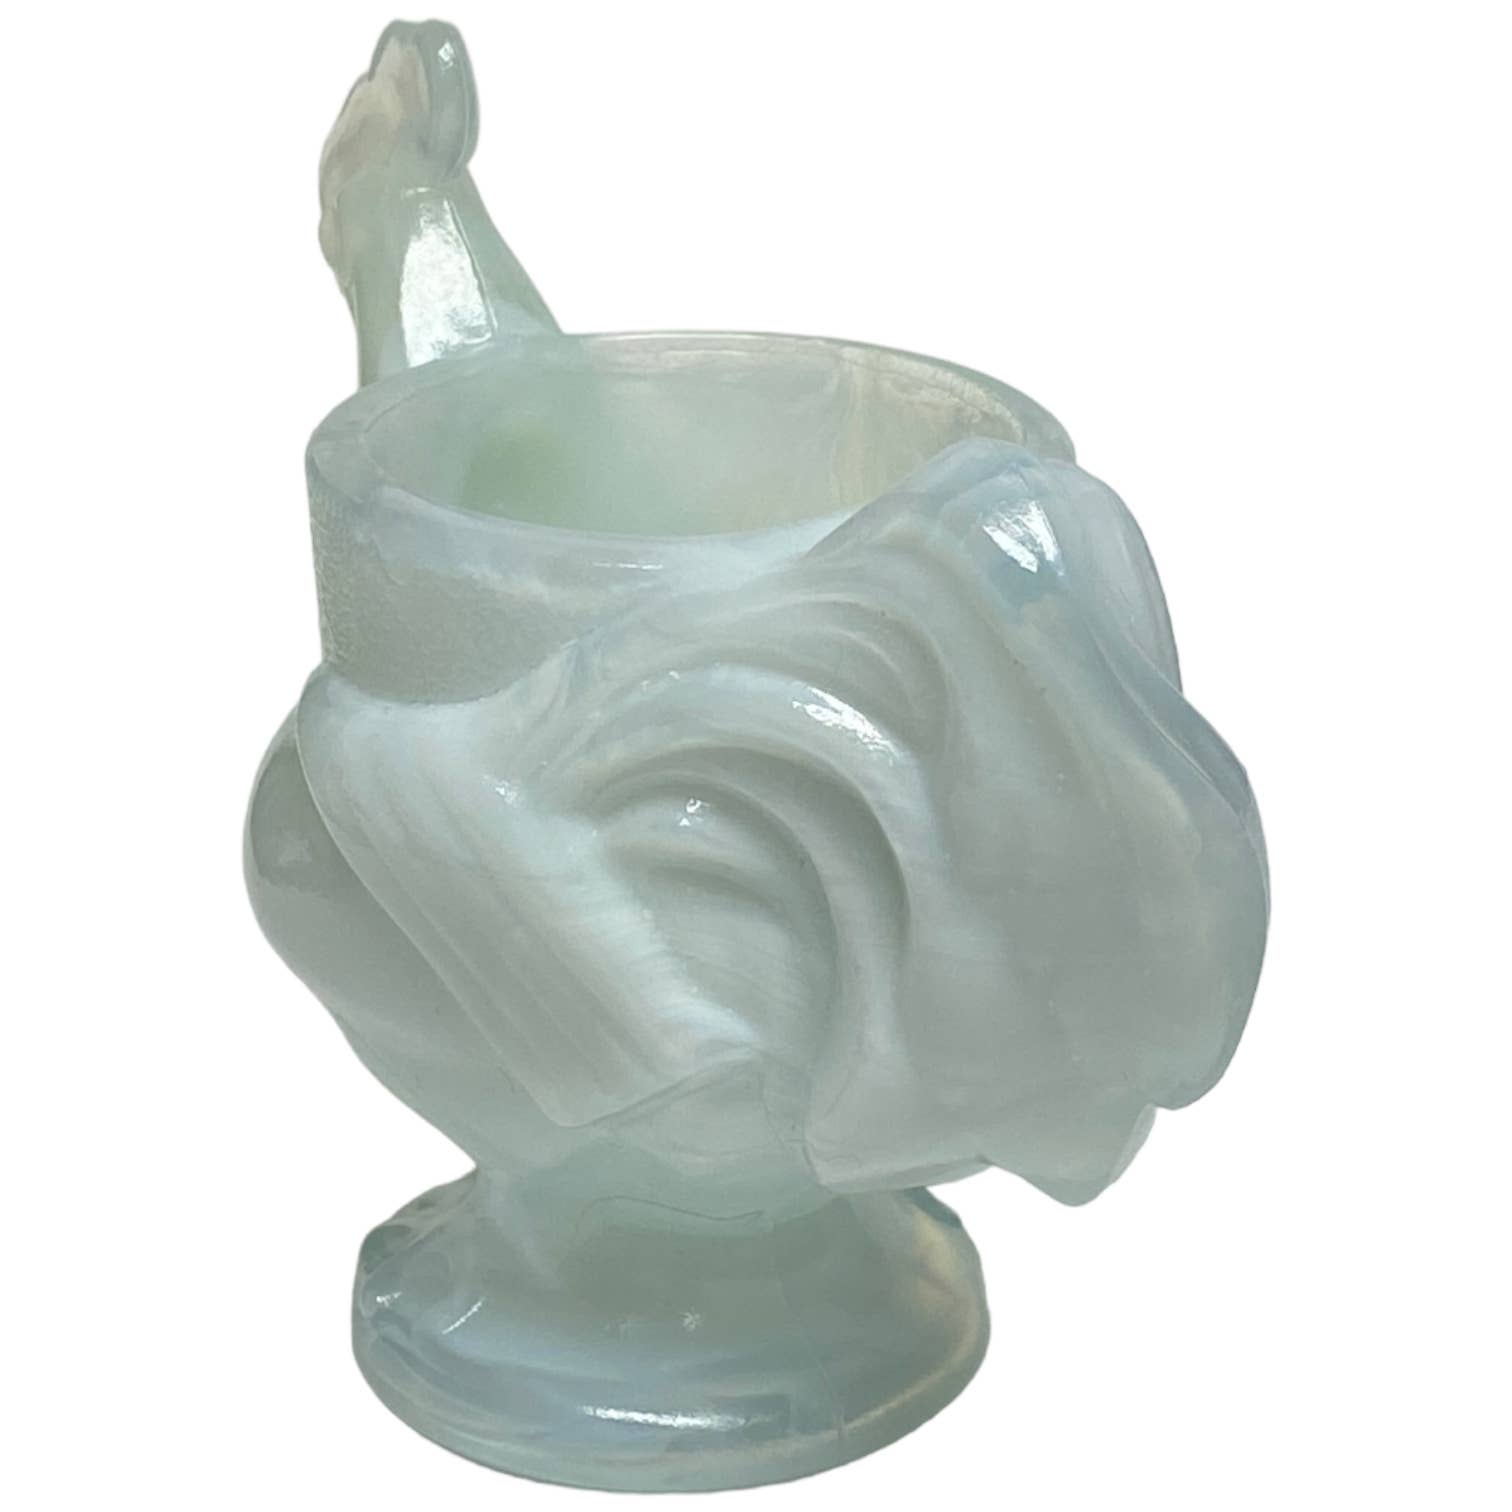 Boyds Glass XL Rooster Egg Cup Toothpick Holder 2000 Millennium White Vaseline